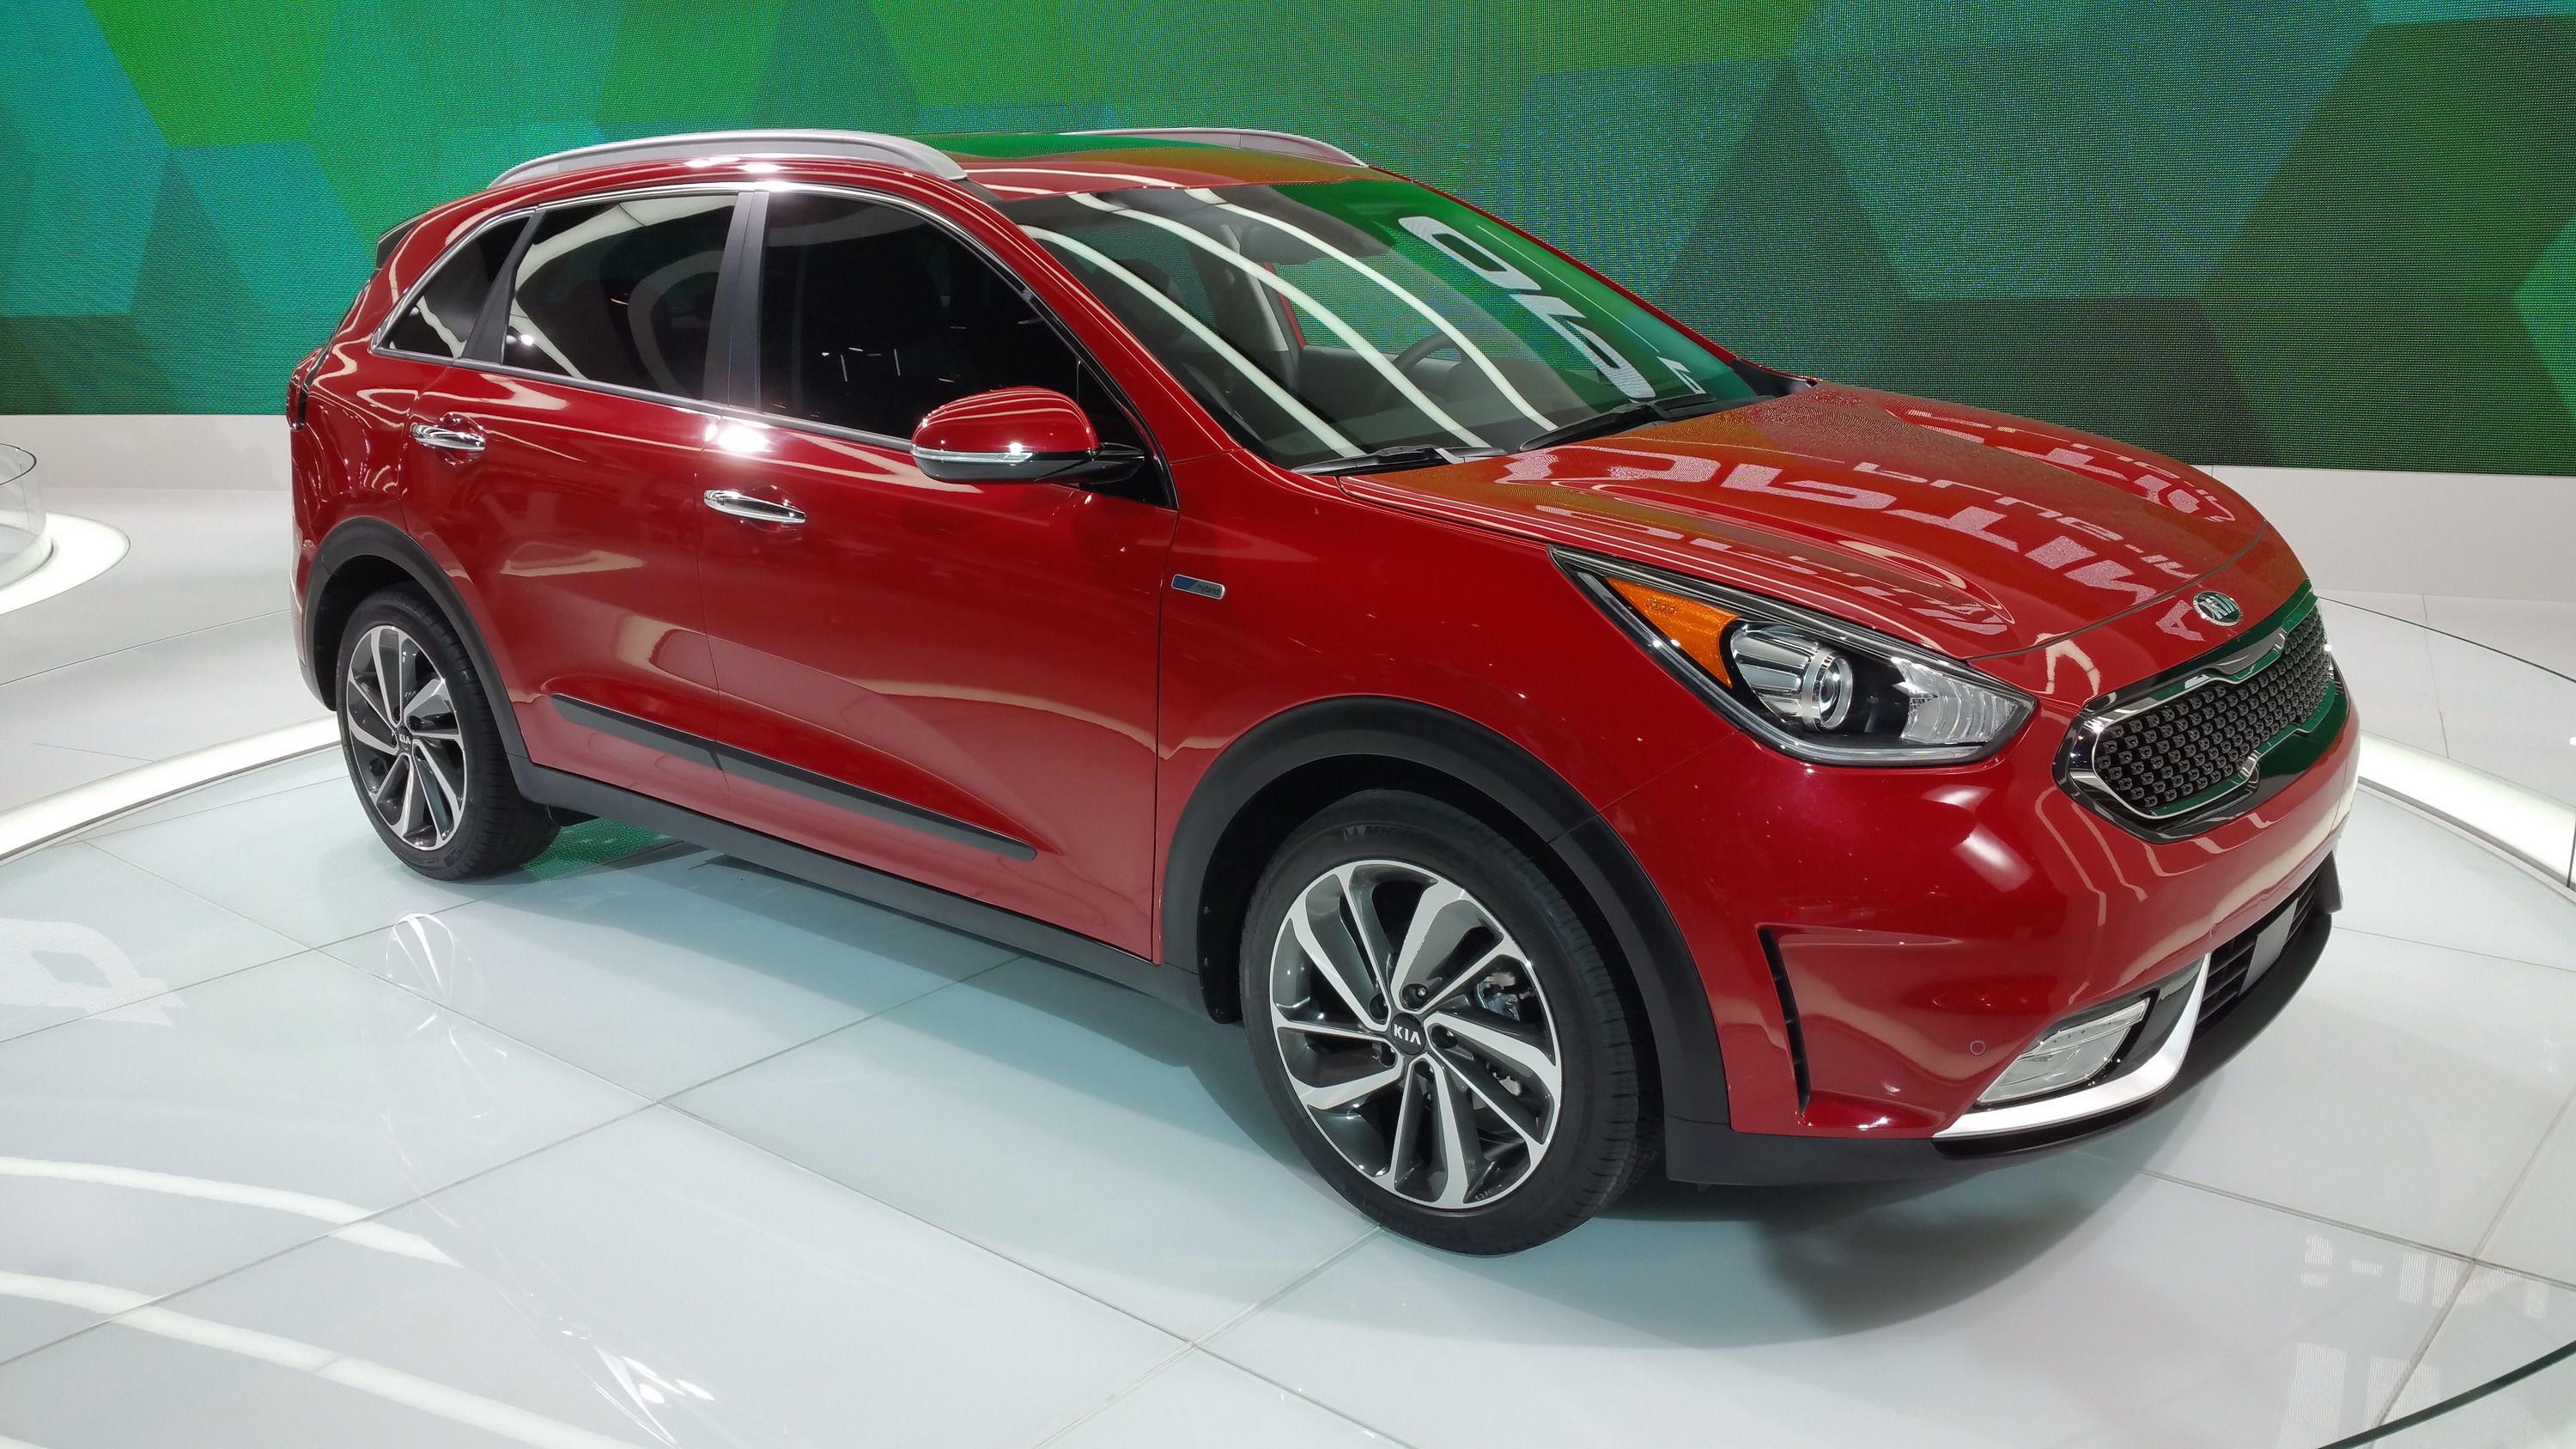 2017 Kia is Looking to Electrify the Niro Crossover